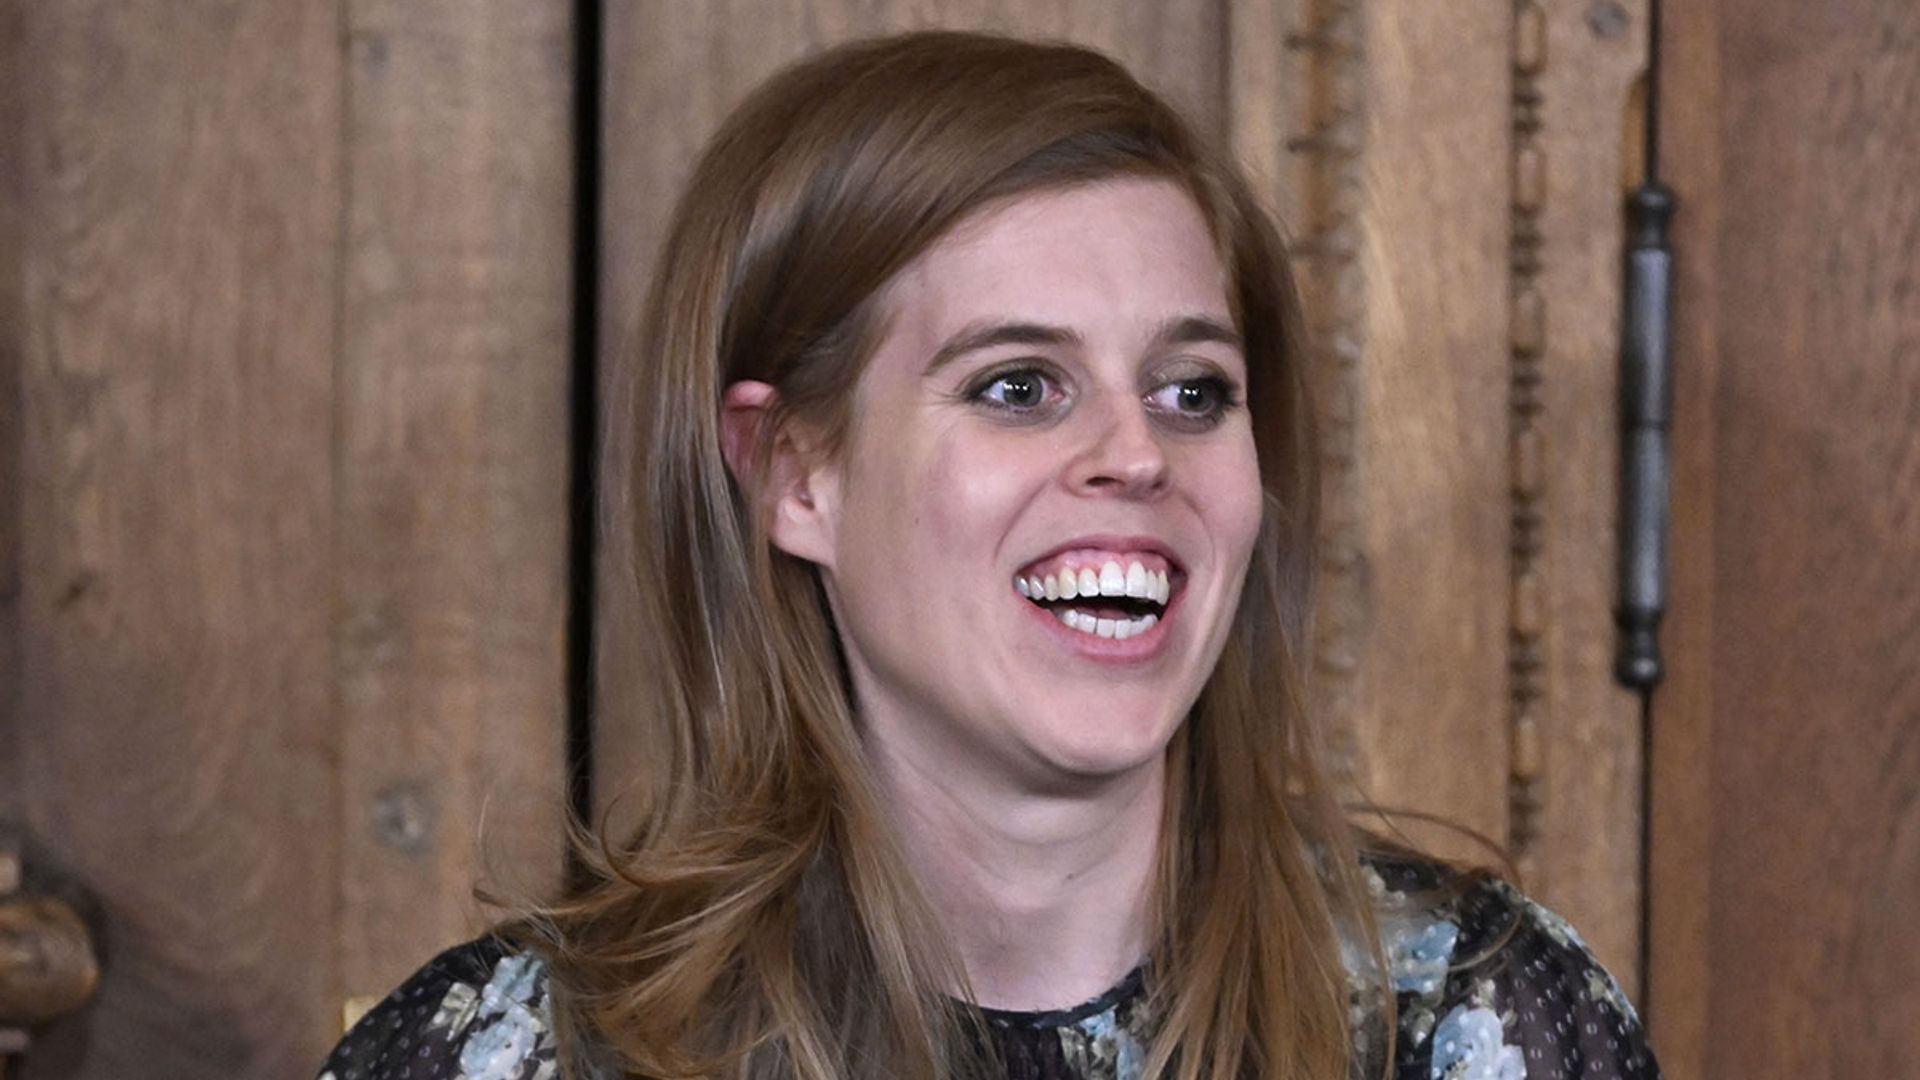 Princess Beatrice channels sister Eugenie with new look – did you spot the connection?